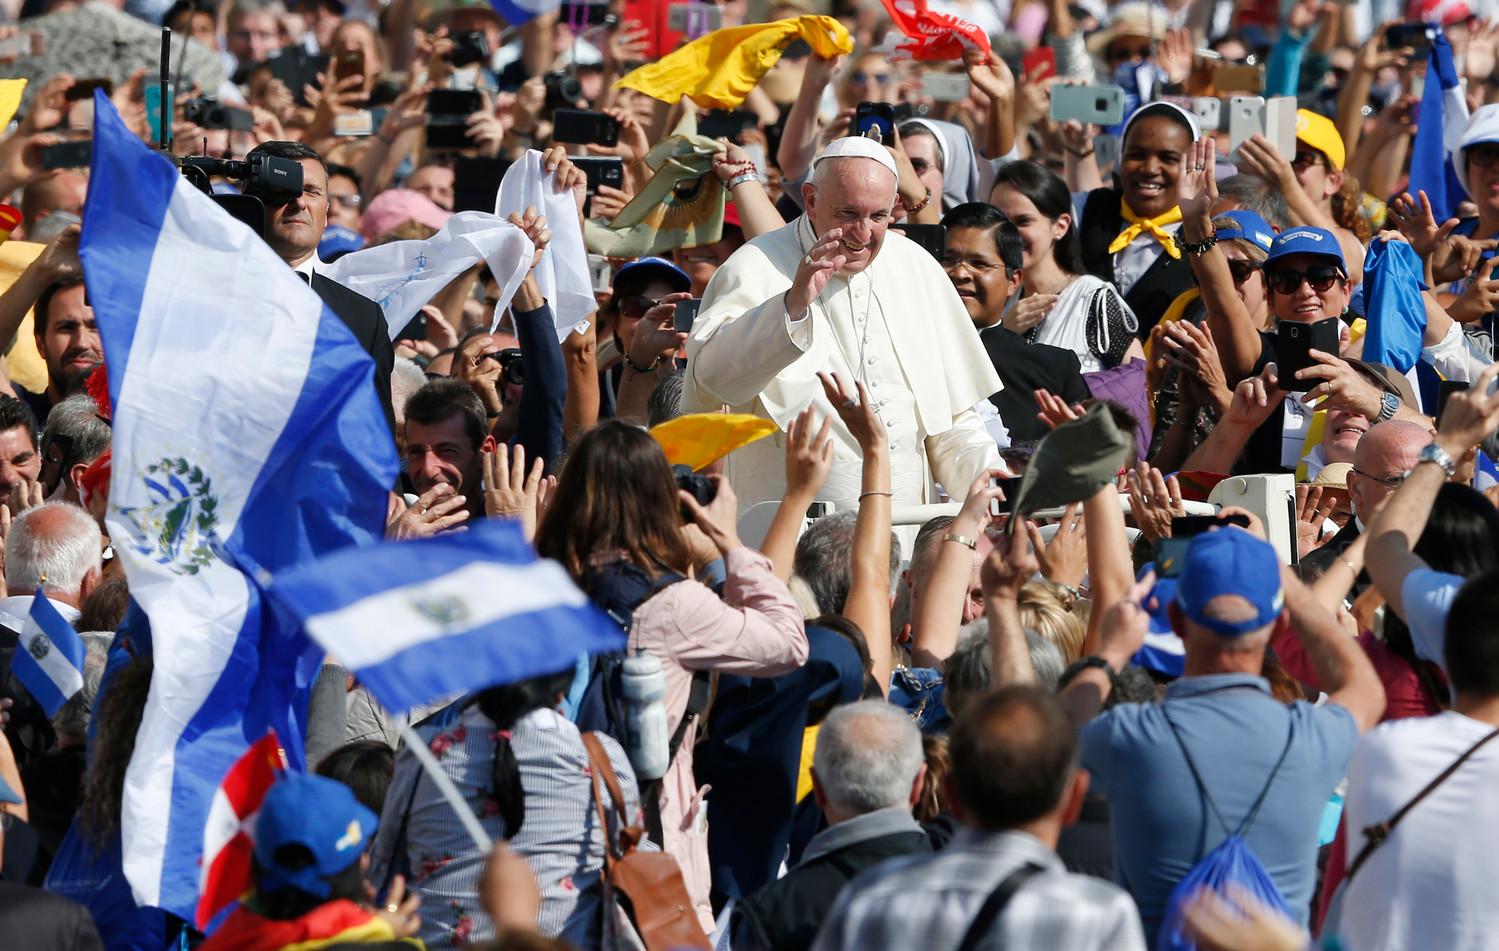 Pope Francis greets the crowd after celebrating the canonization Mass for seven new saints in St. Peter’s Square at the Vatican Oct. 14. Among those canonized were St. Paul VI and St. Oscar Romero.